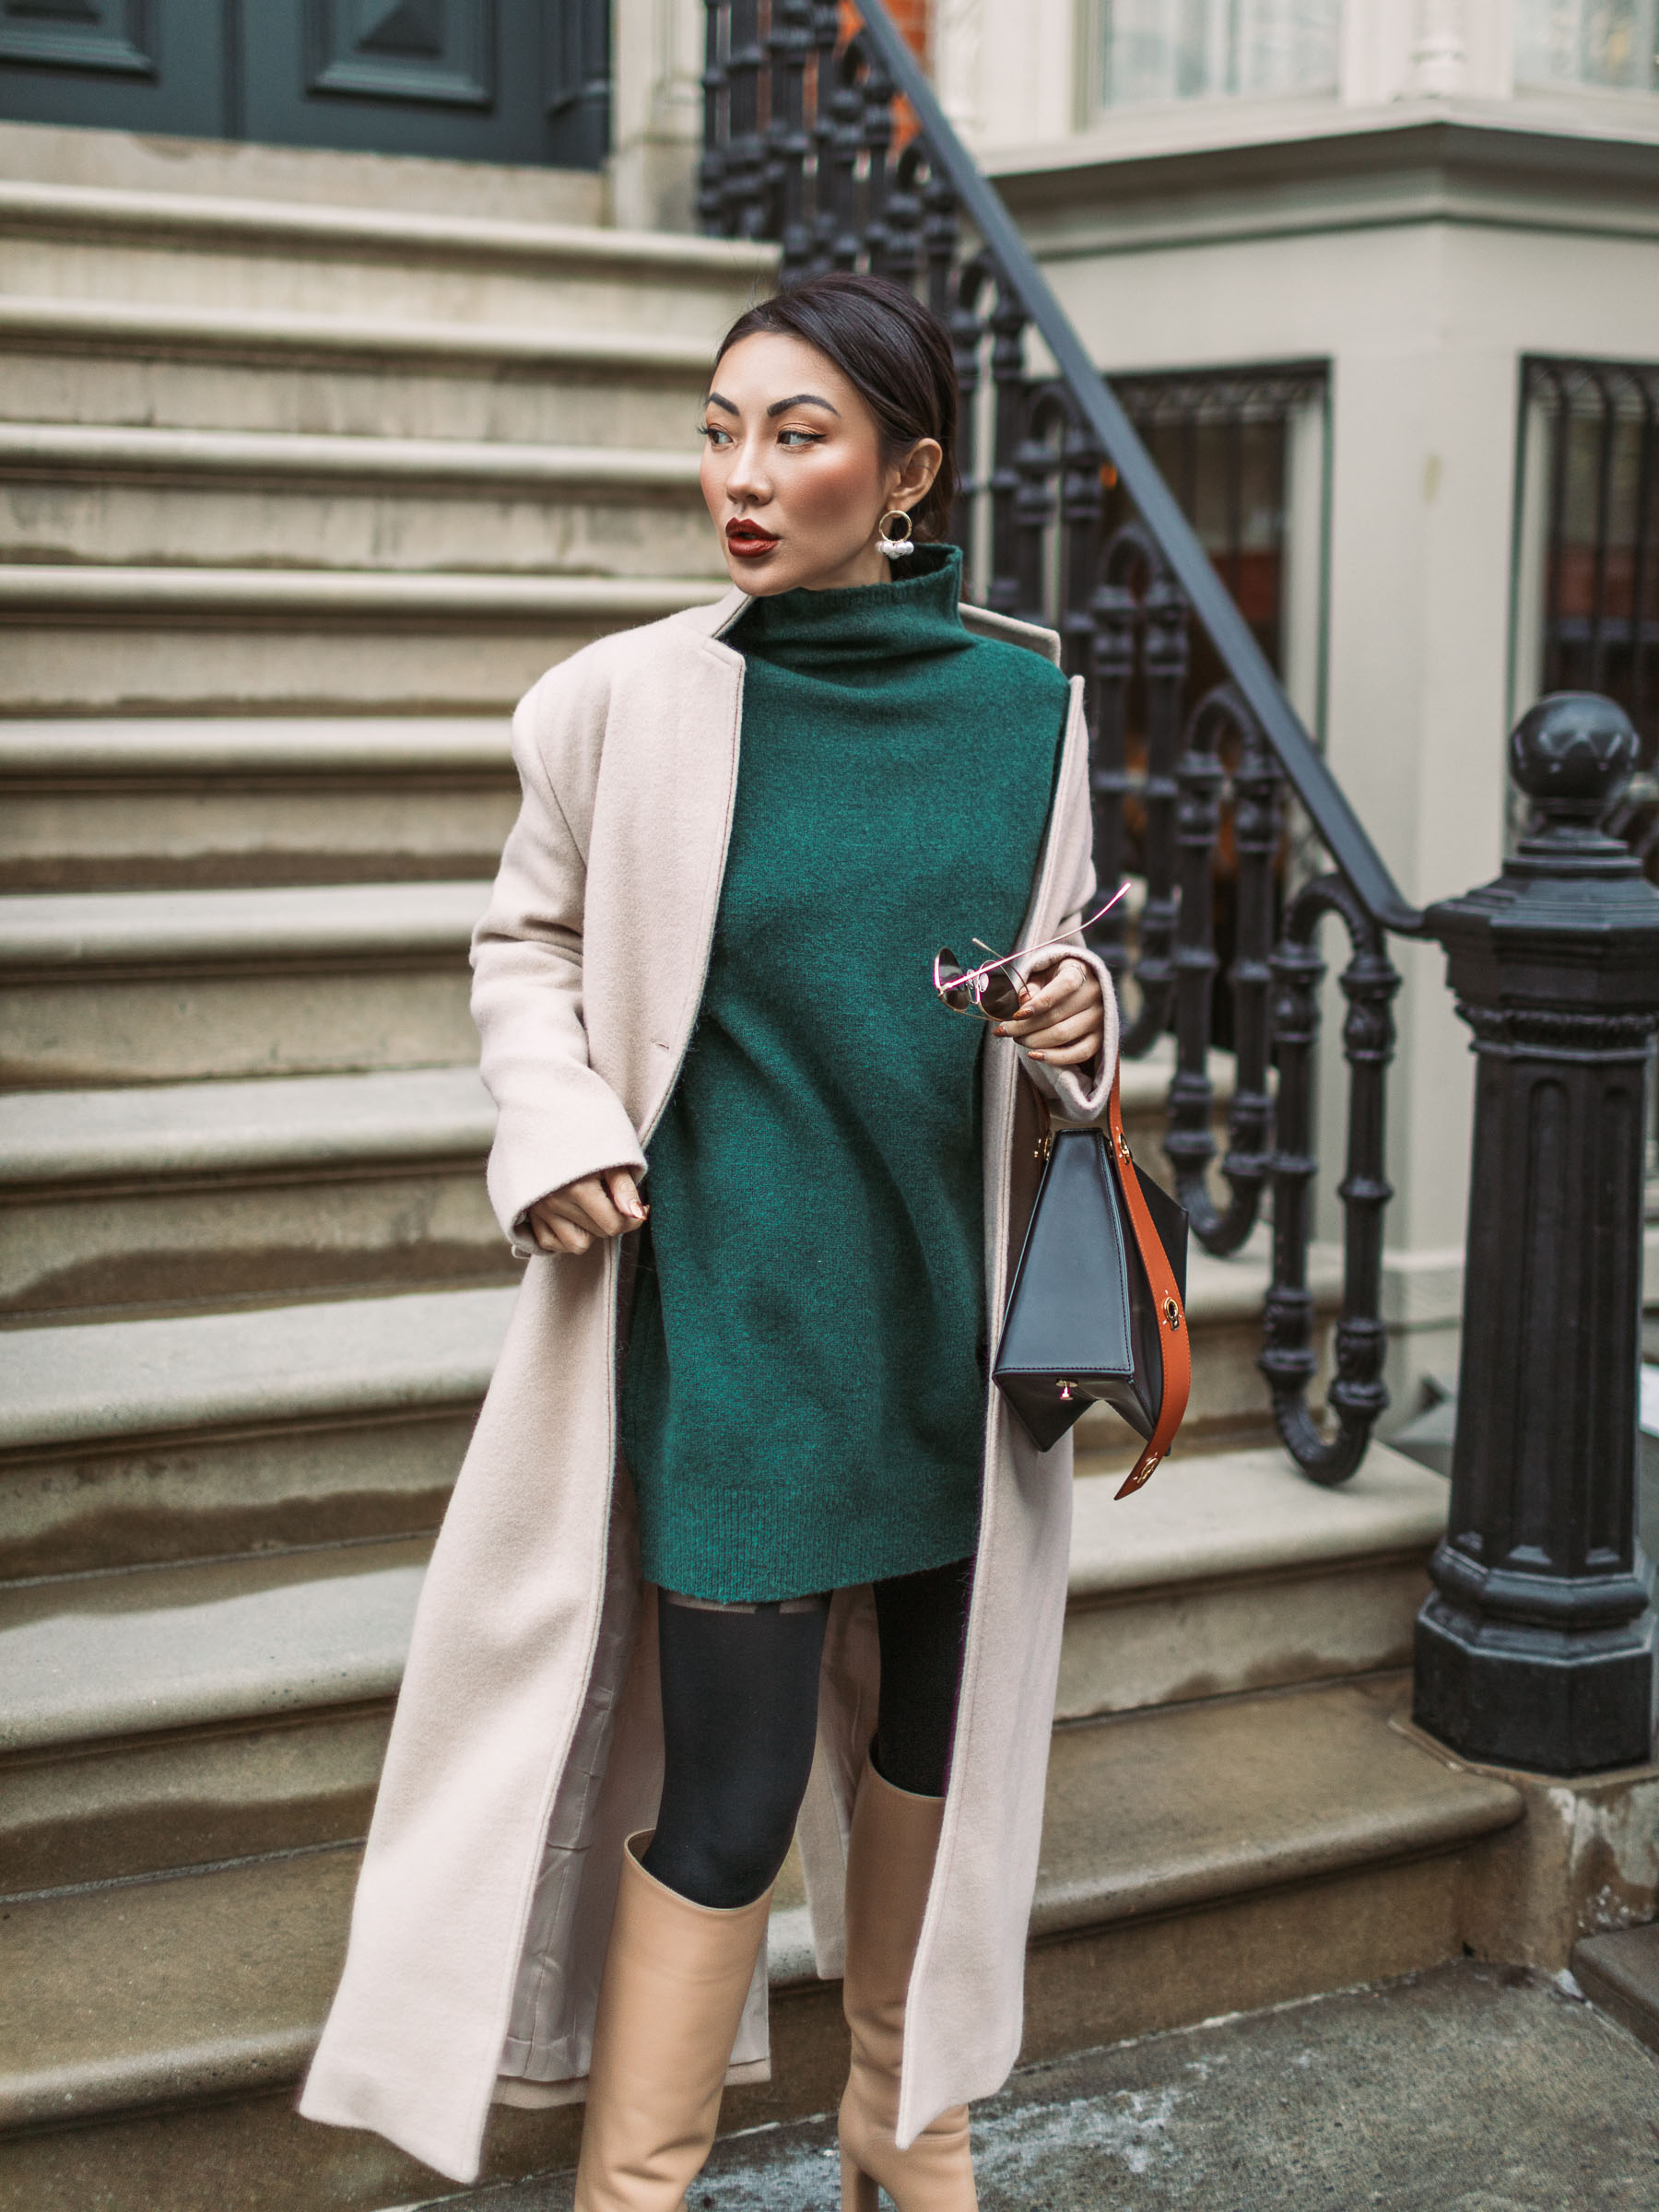 Winter Layering Basics // Leggings, Sweater Dress, Maxi Coat // Notjessfashion.com // Winter layers outfit, how to layer in the winter, new york fashion blogger, top blogger, asian blogger, fashion blogger winter looks, cozy winter outfit